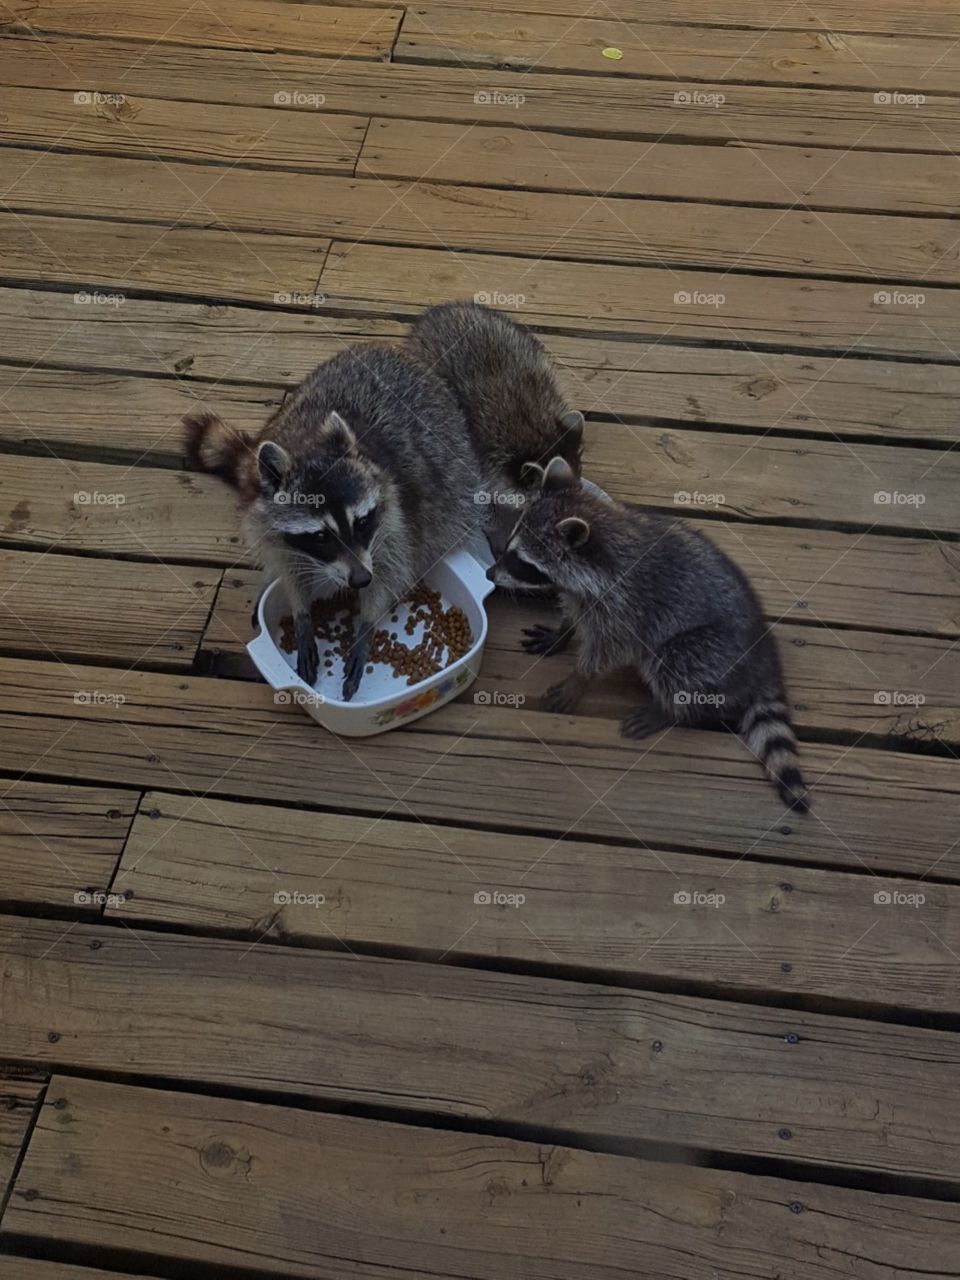 Masked bandits caught stealing cat food!